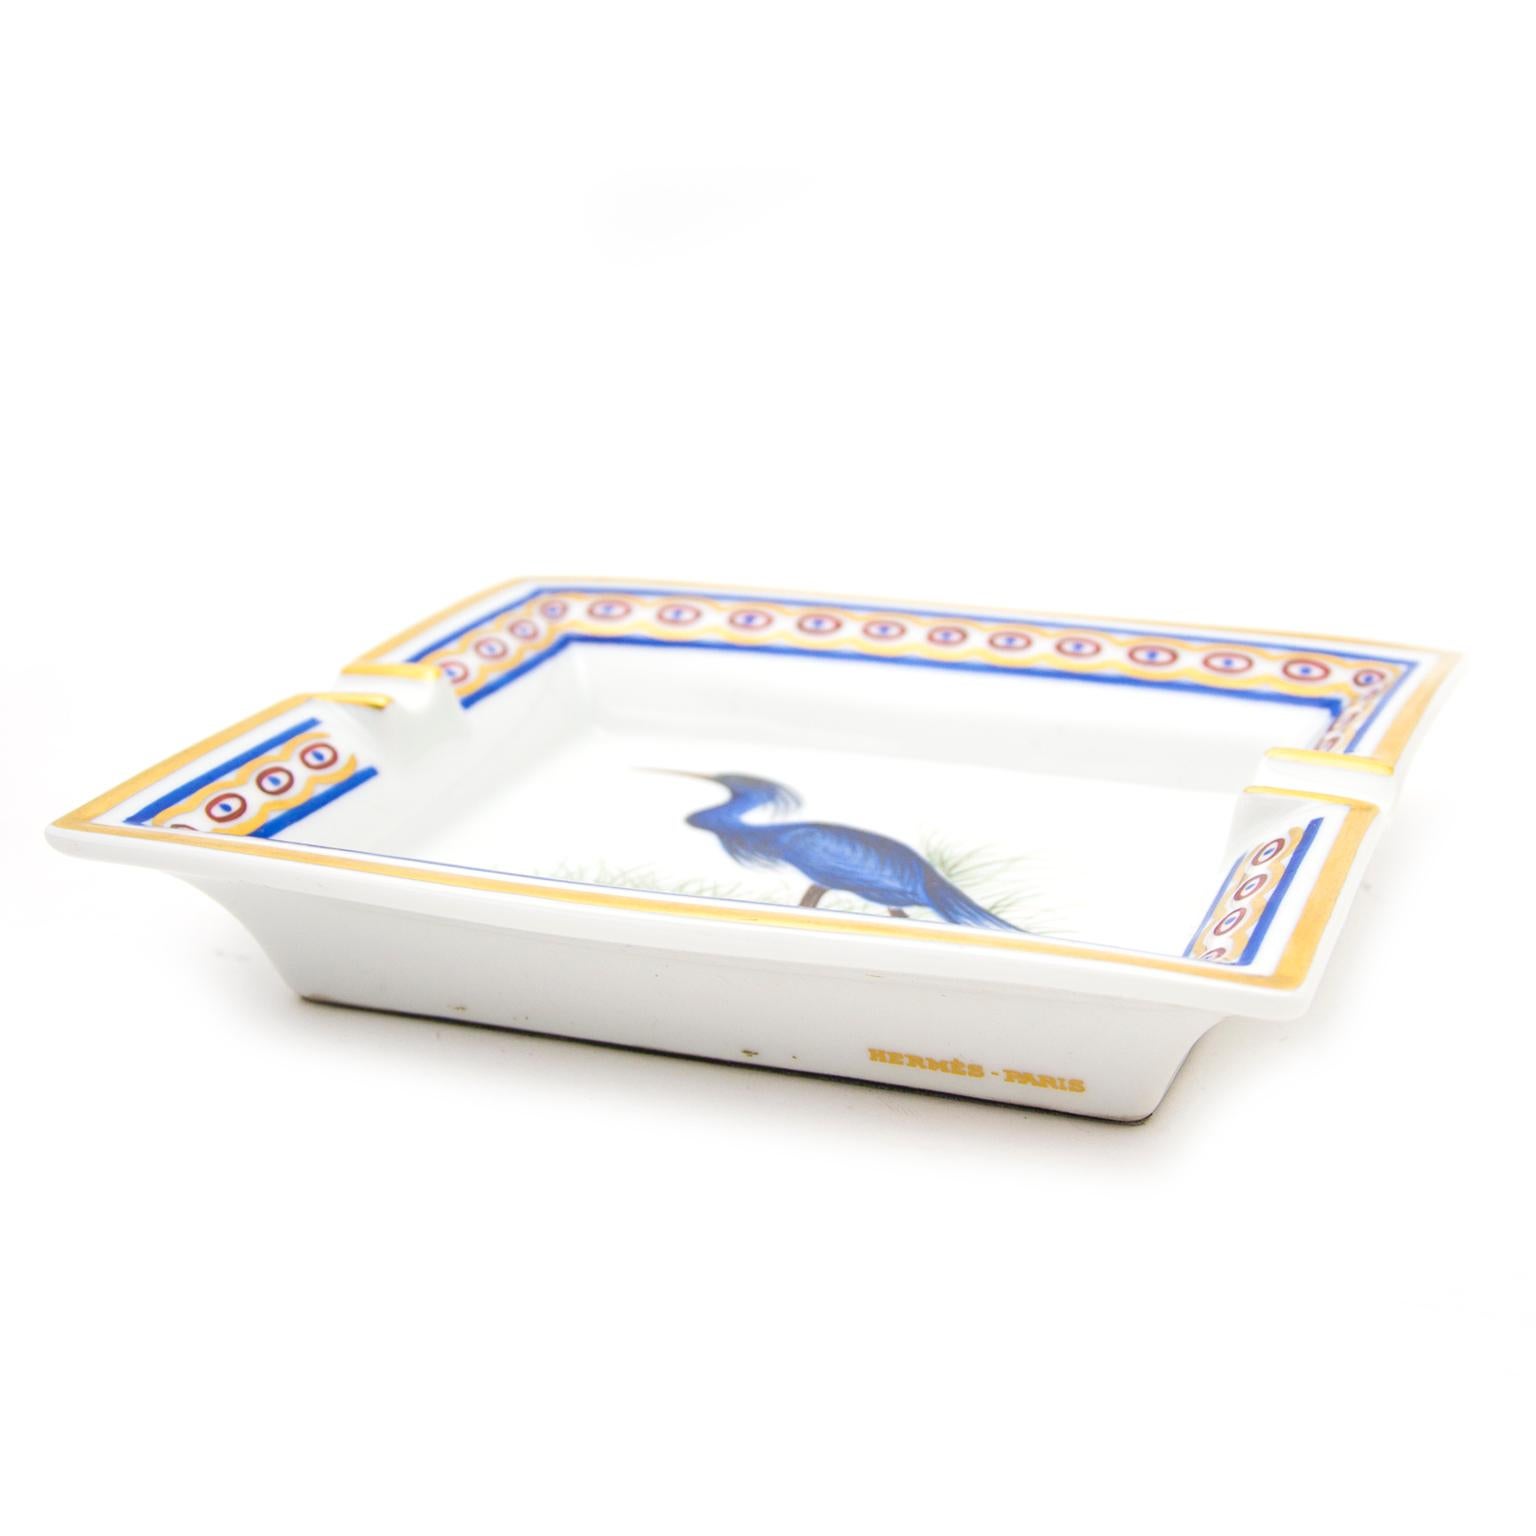 In good condition

Estimated retail price: €445

Hermès Ashtray Blue Bird 'Florida Caerulea'

This gorgeous ashtray in Limoges porcelain is a true addition to any home. The ashtray depicts the Florida Caerulea, a blue bird.

Finished with a gold